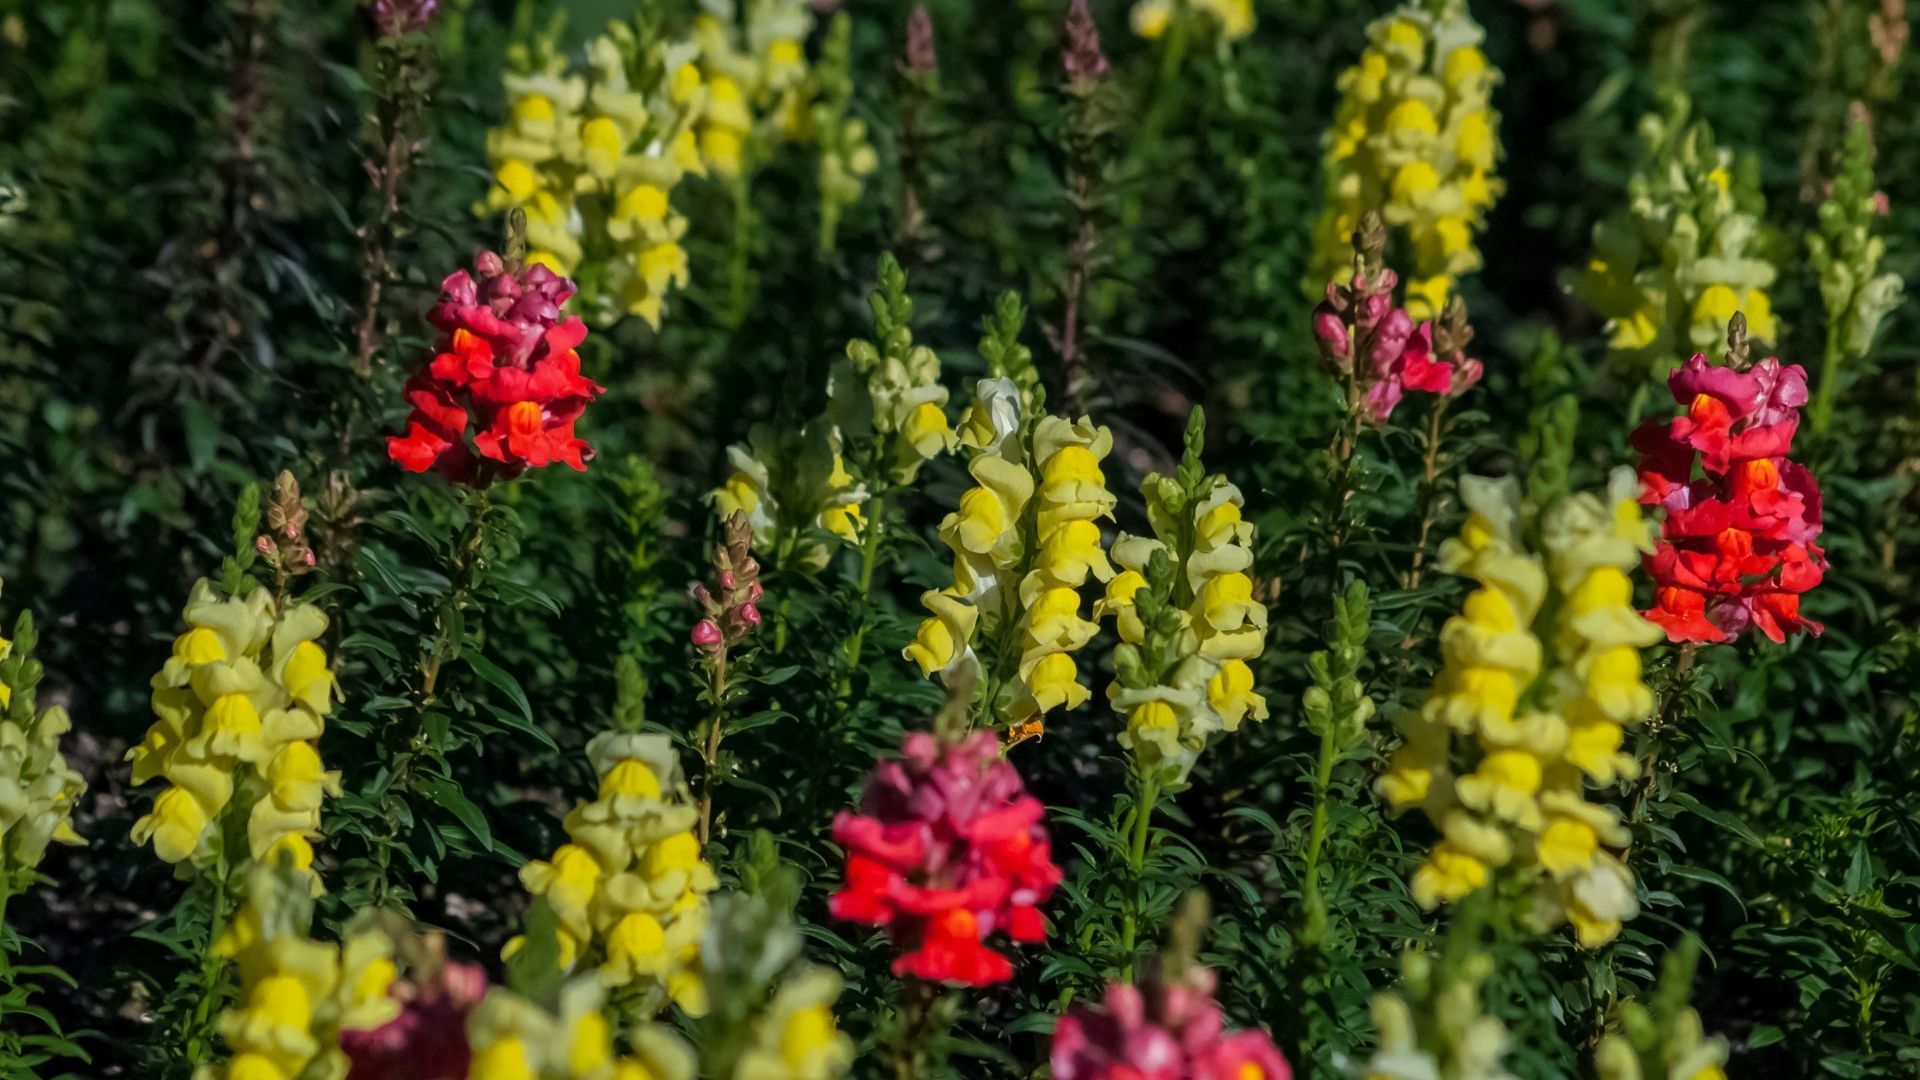 Most beautiful flowers: Snapdragon